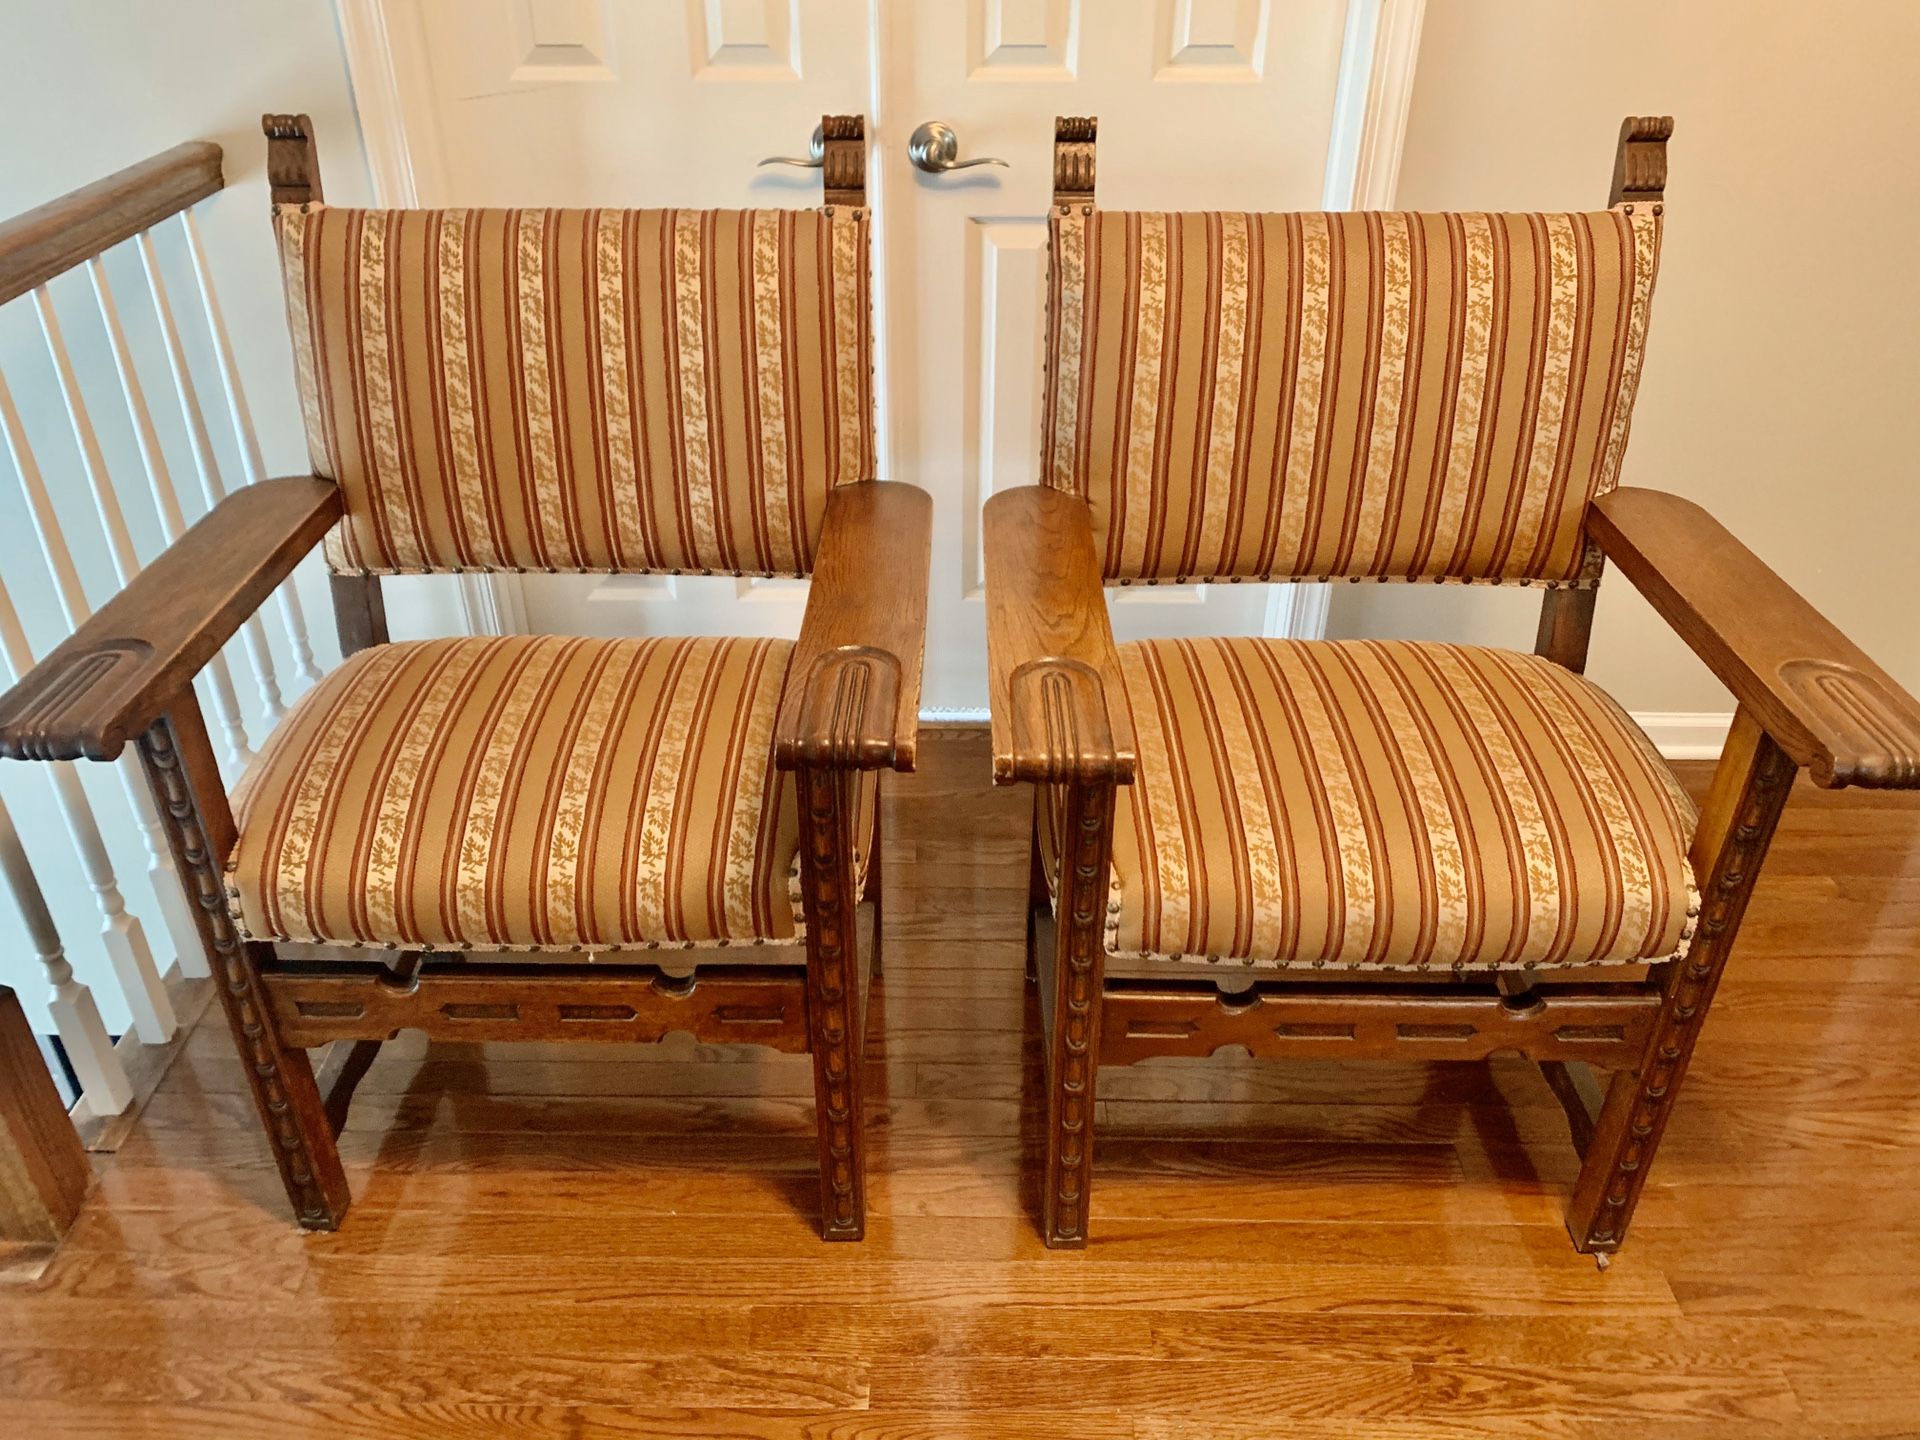 ANTIQUE LOOKING CHAIRS